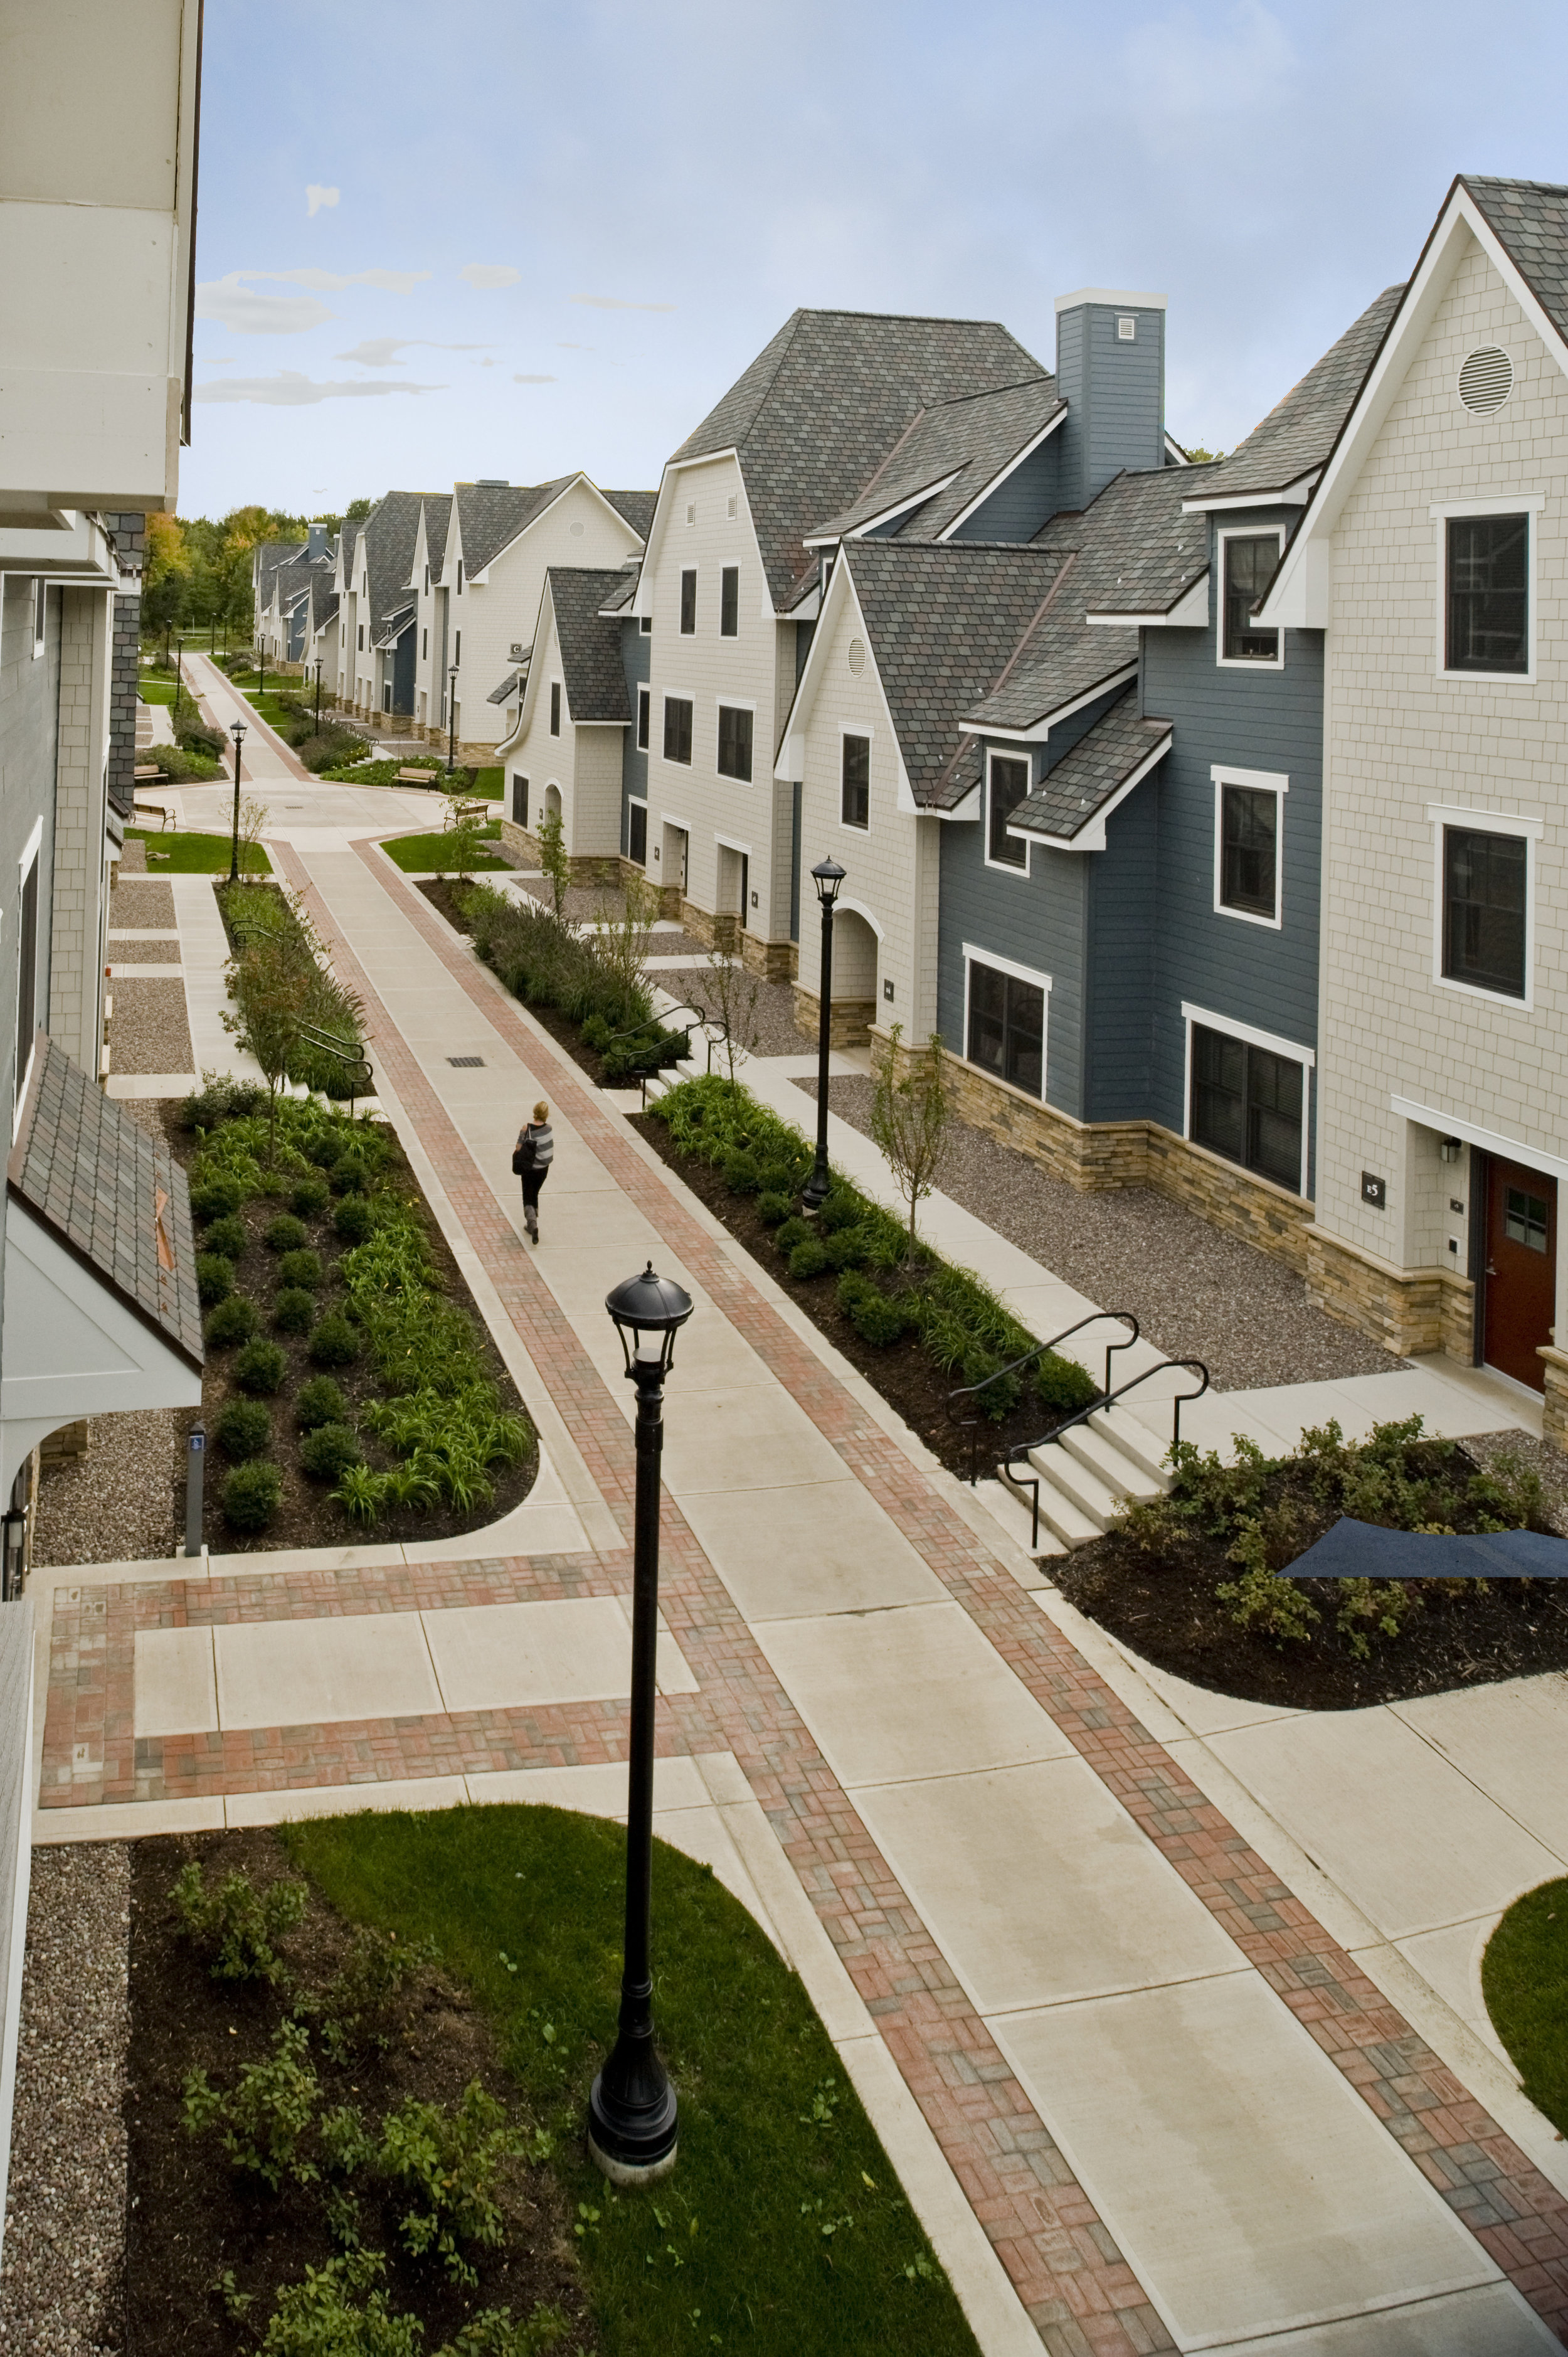 THE VILLAGE TOWNHOUSES&lt;strong&gt;A pedestrian village within a college campus that foregrounds the natural amenities of the site.&lt;/strong&gt;